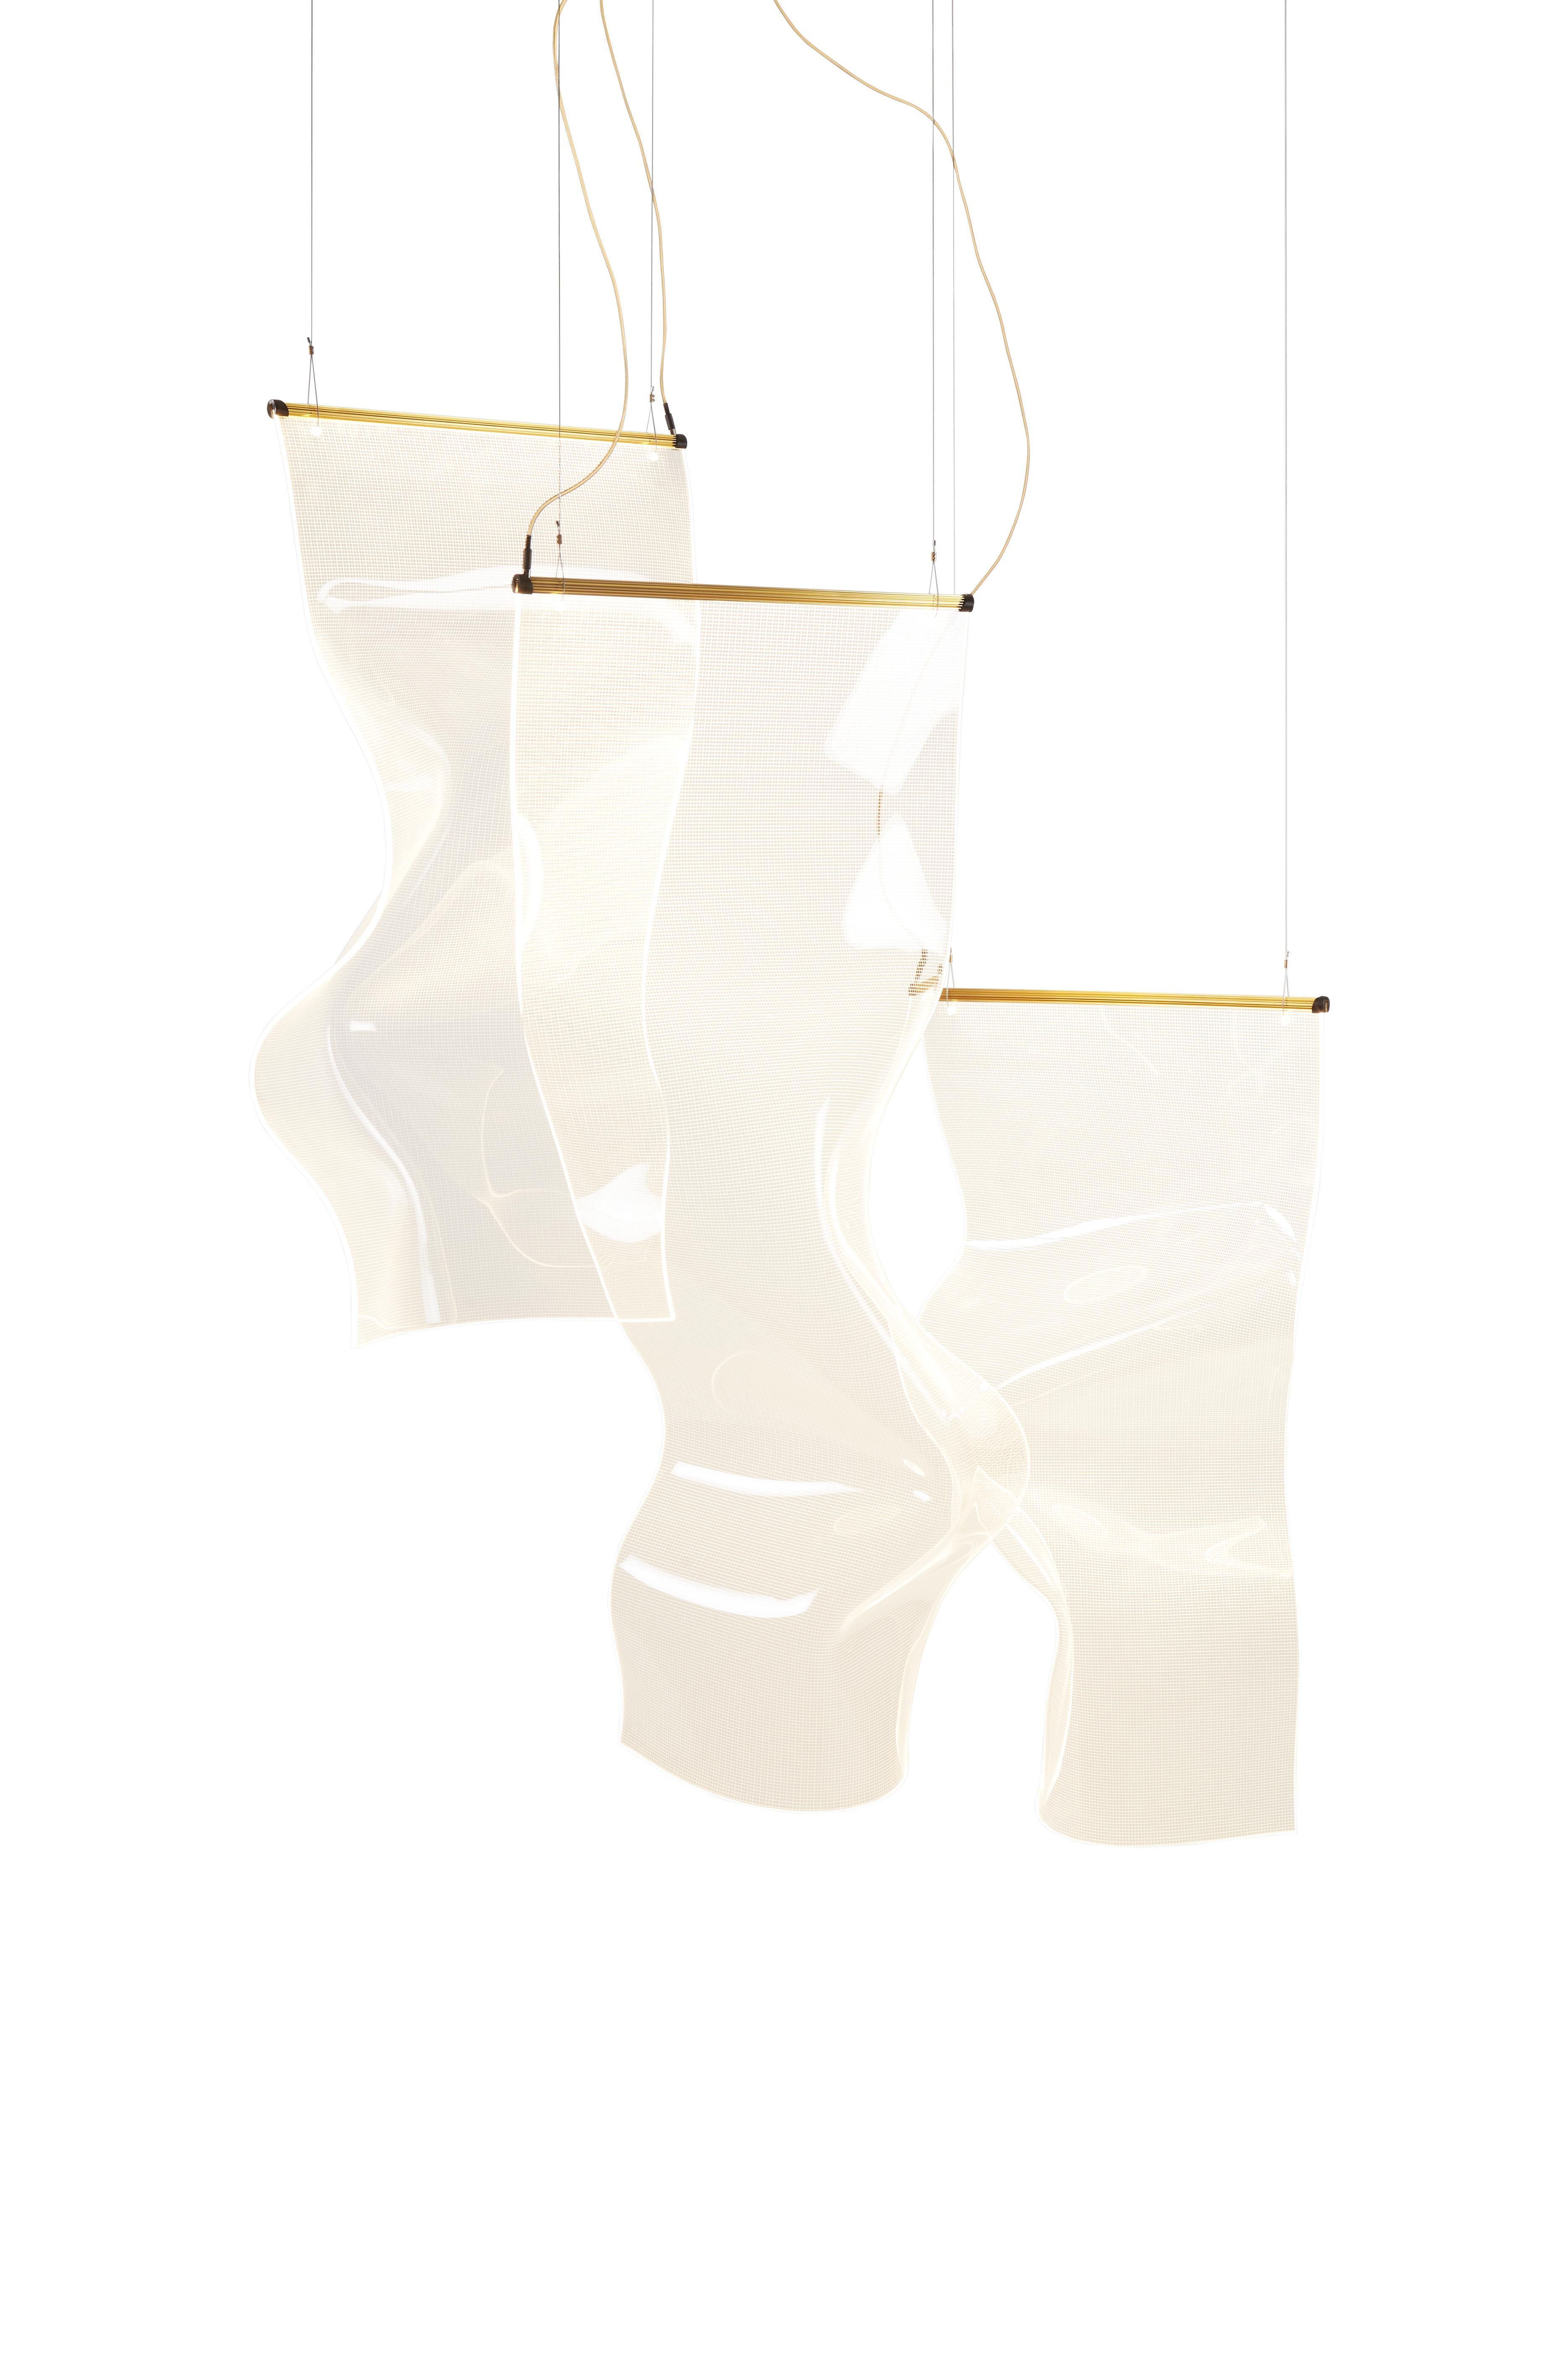 Gweilo Zhou V GR by Partisans


It’s name means ghost in chinese. Makes sense when you look at it, right? Made from hand-molded acrylic.
Suspension lamp. Hand-moulded, transparent acrylic structure. Led strip embedded in the gold or silver anodised